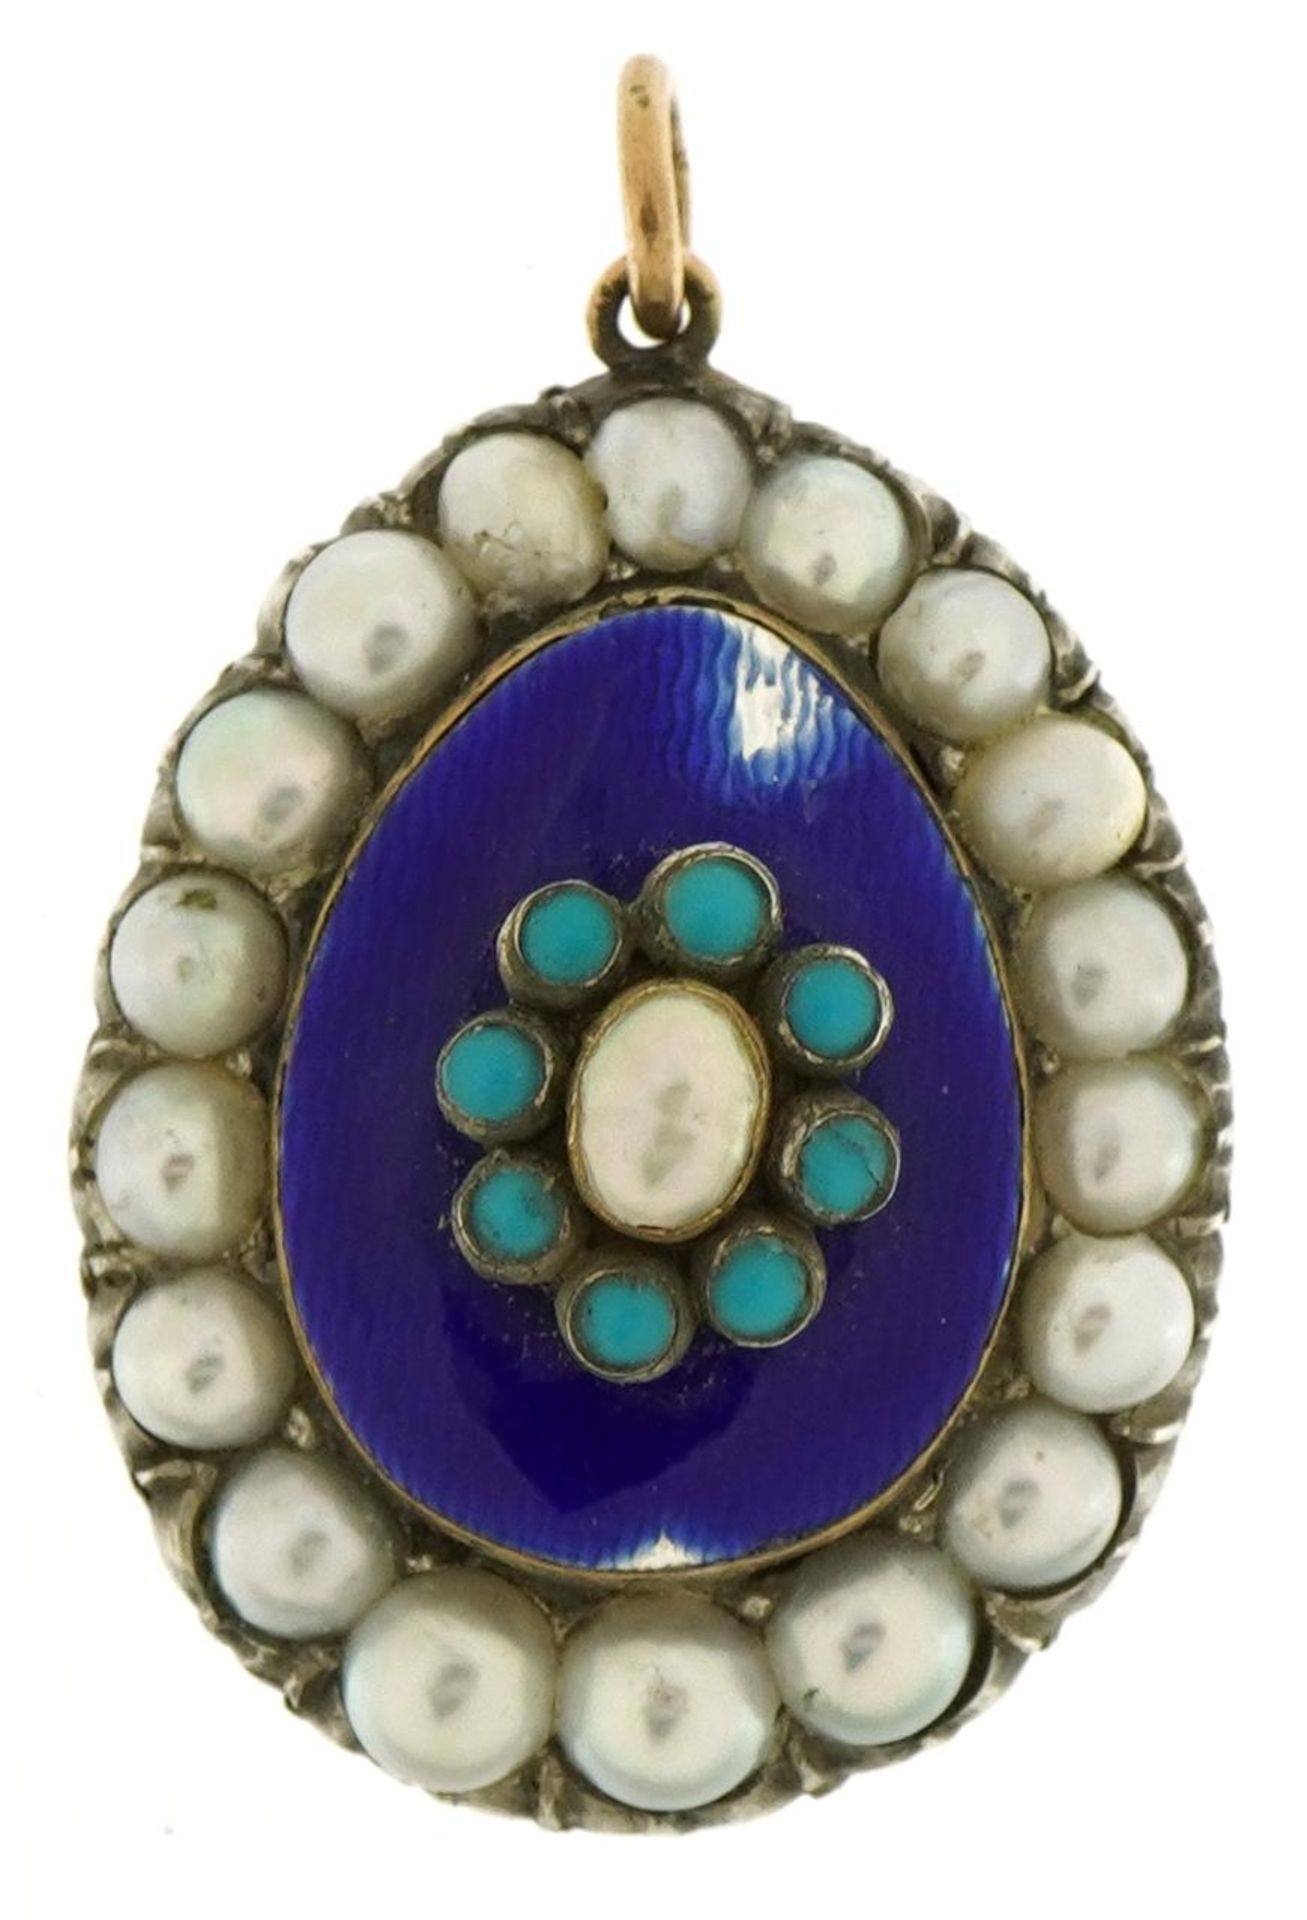 Antique unmarked gold blue enamel pendant set with turquoise and pearls, tests as 15ct+ gold, 3.